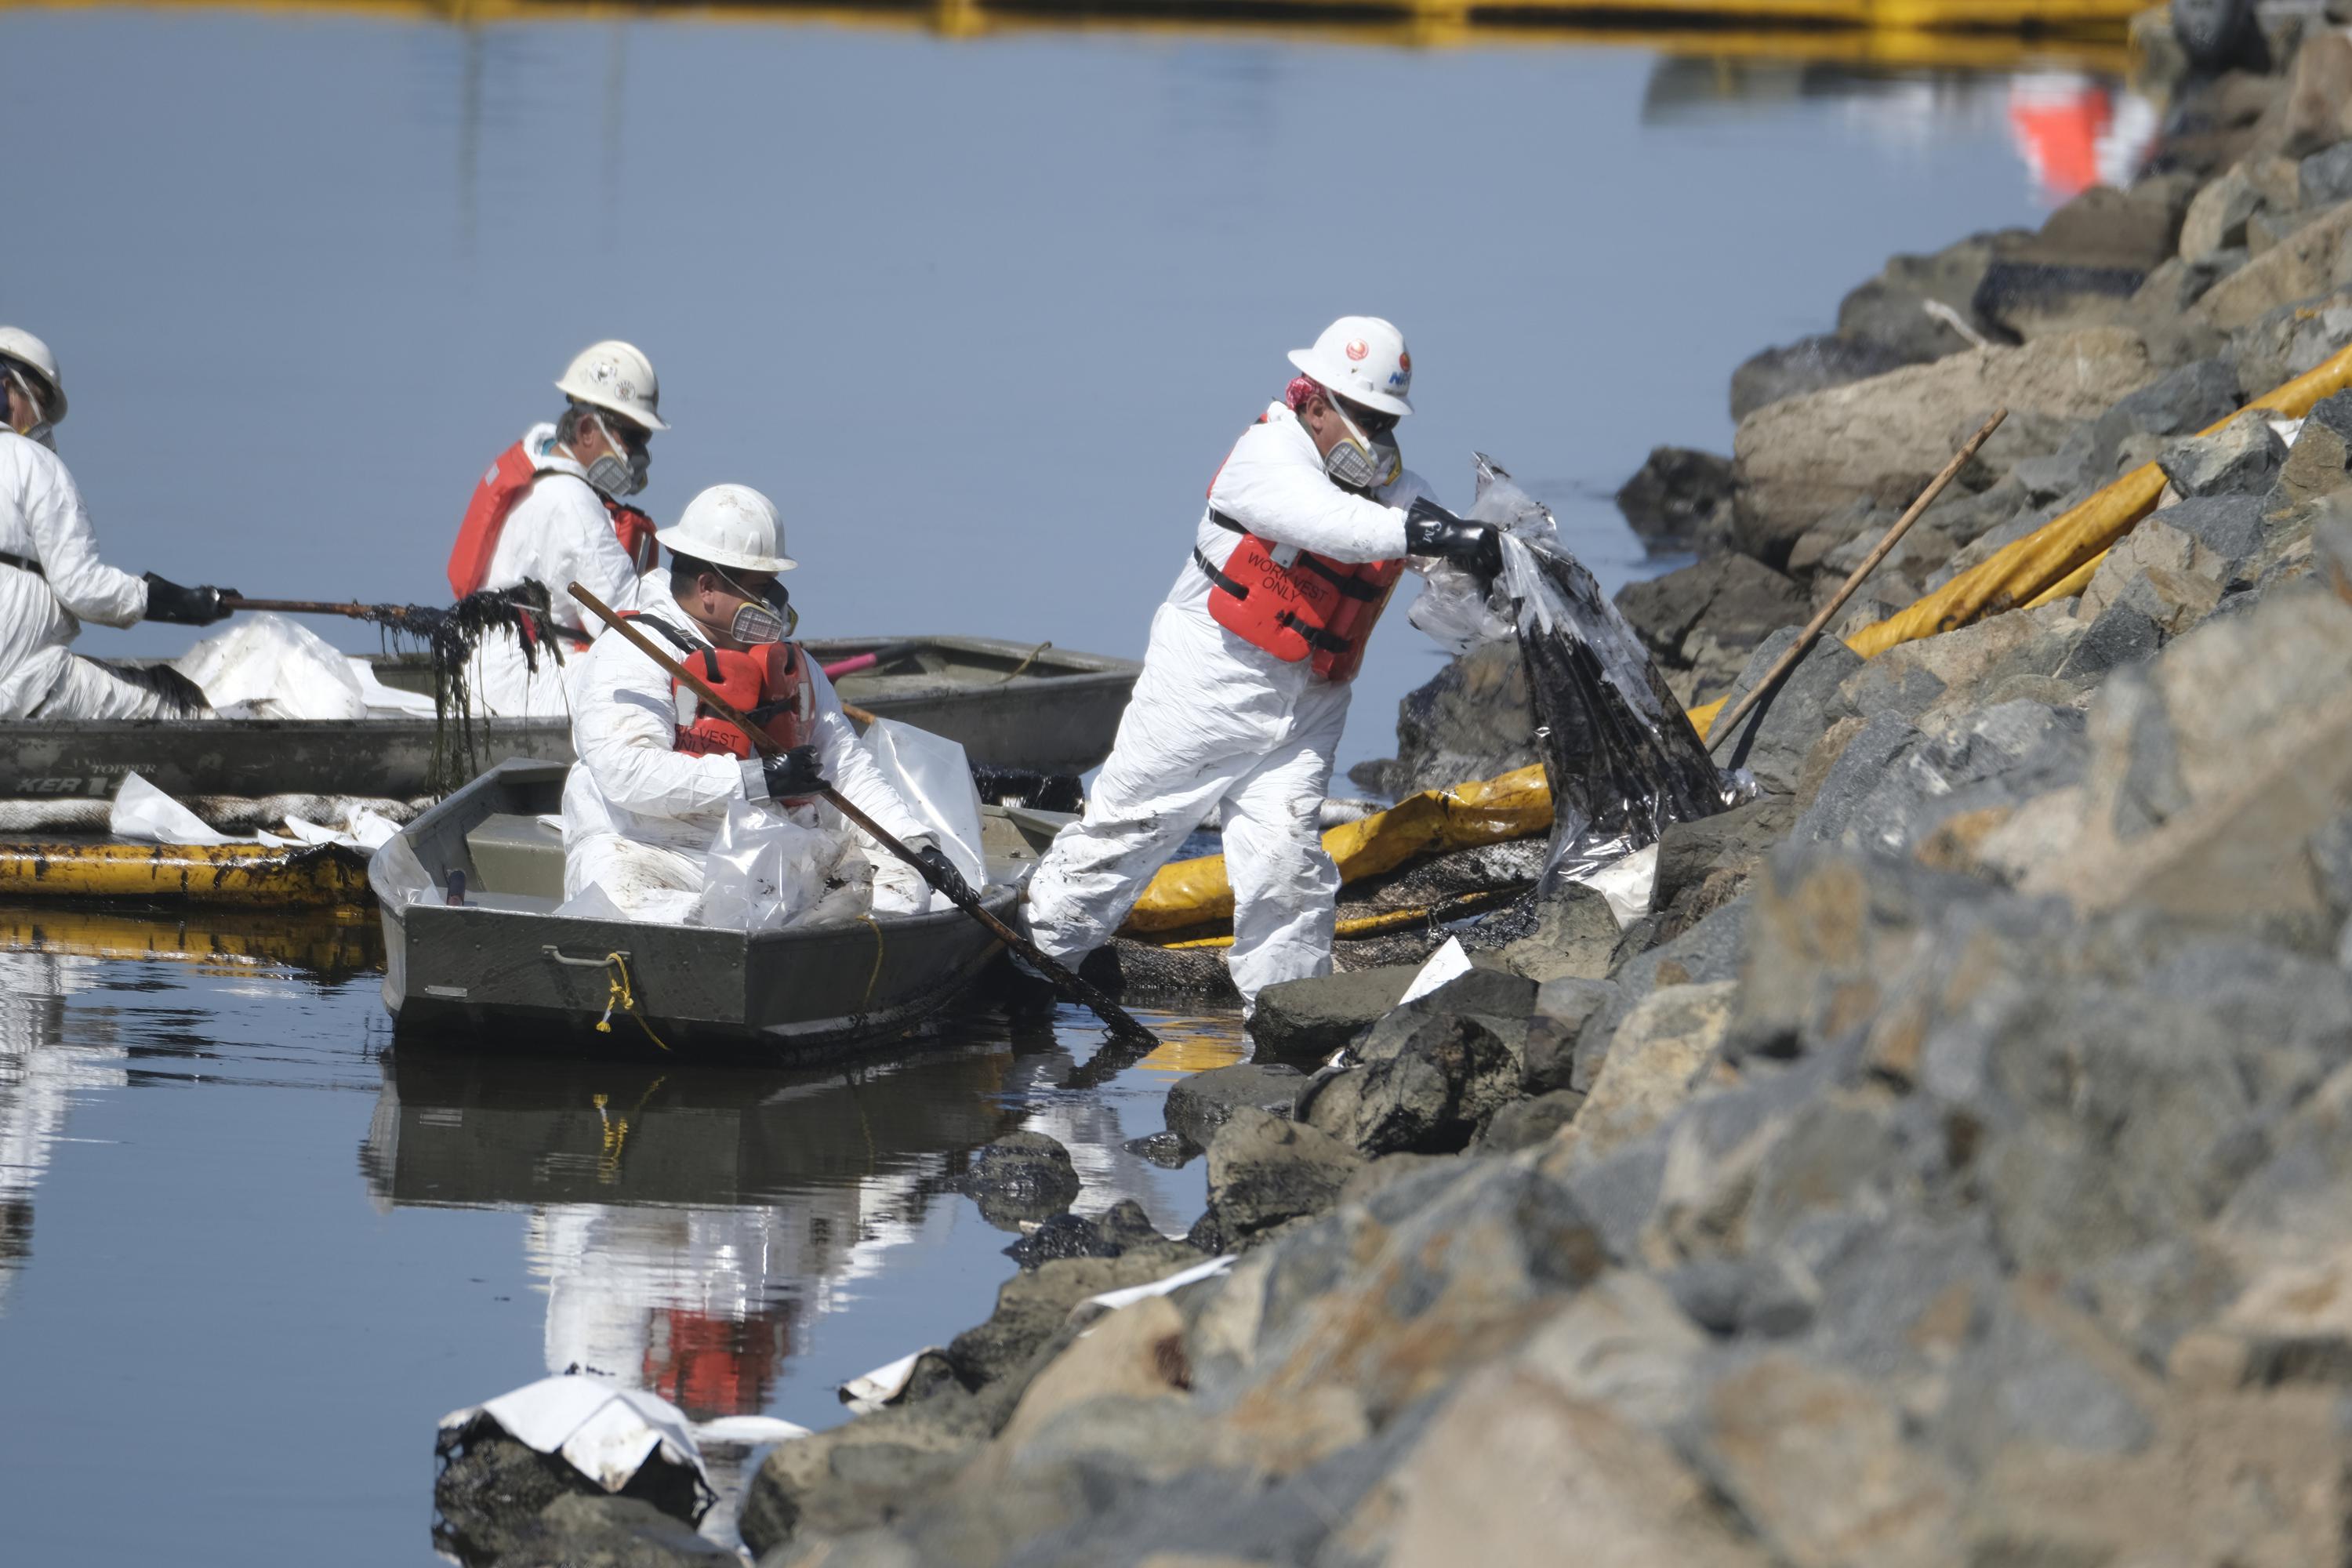 Crews race to limit damage from major California oil spill AP News